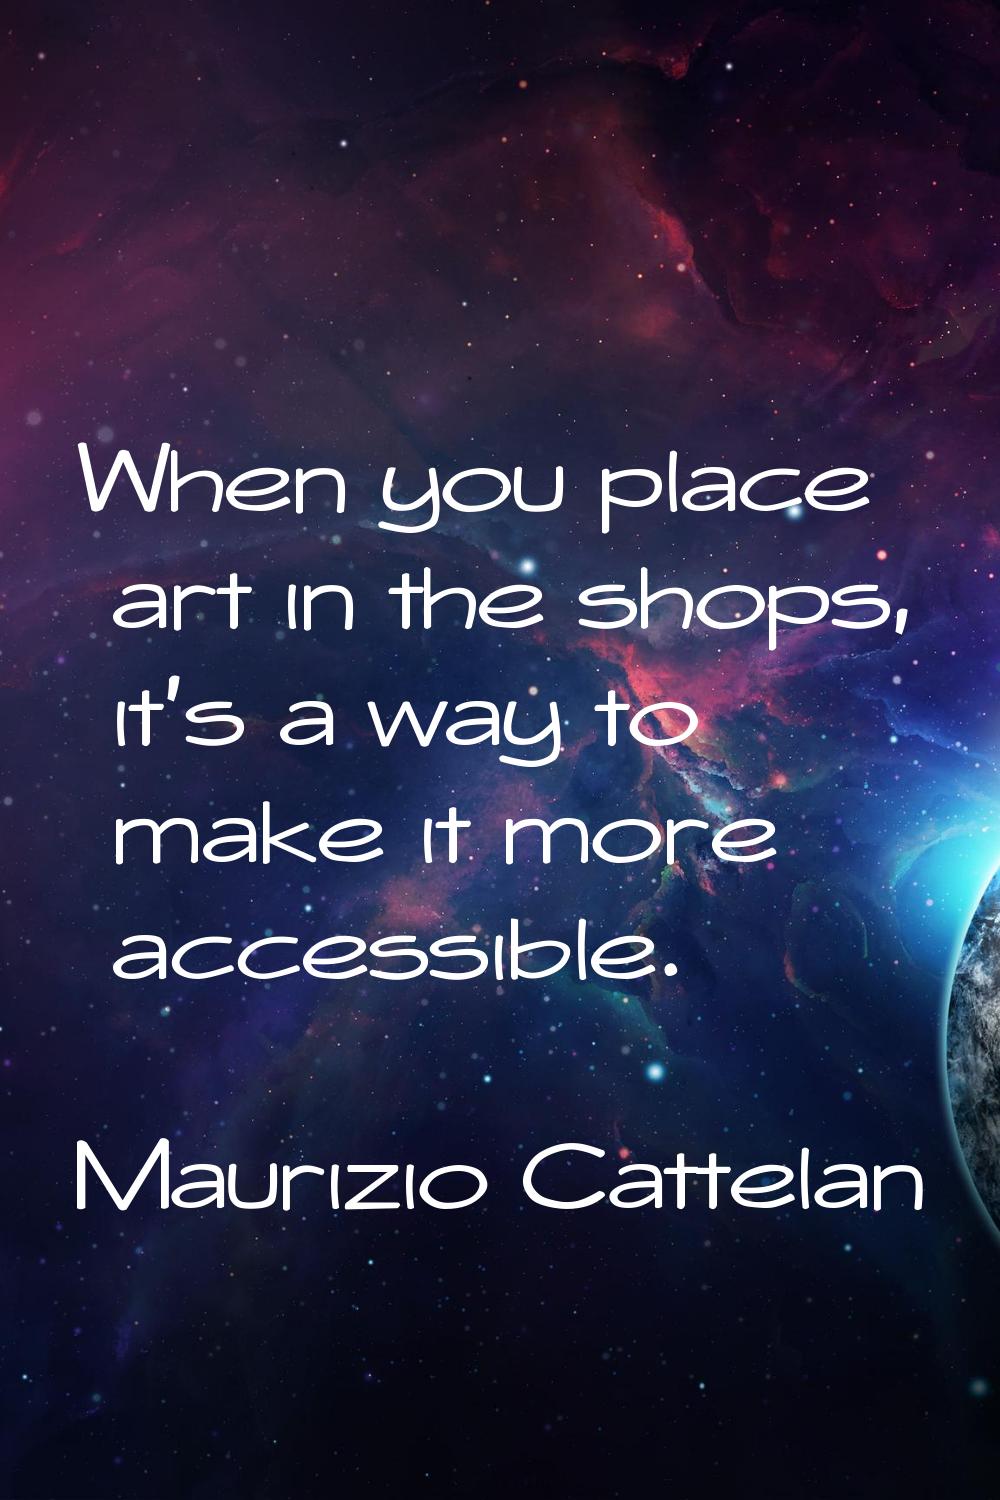 When you place art in the shops, it's a way to make it more accessible.